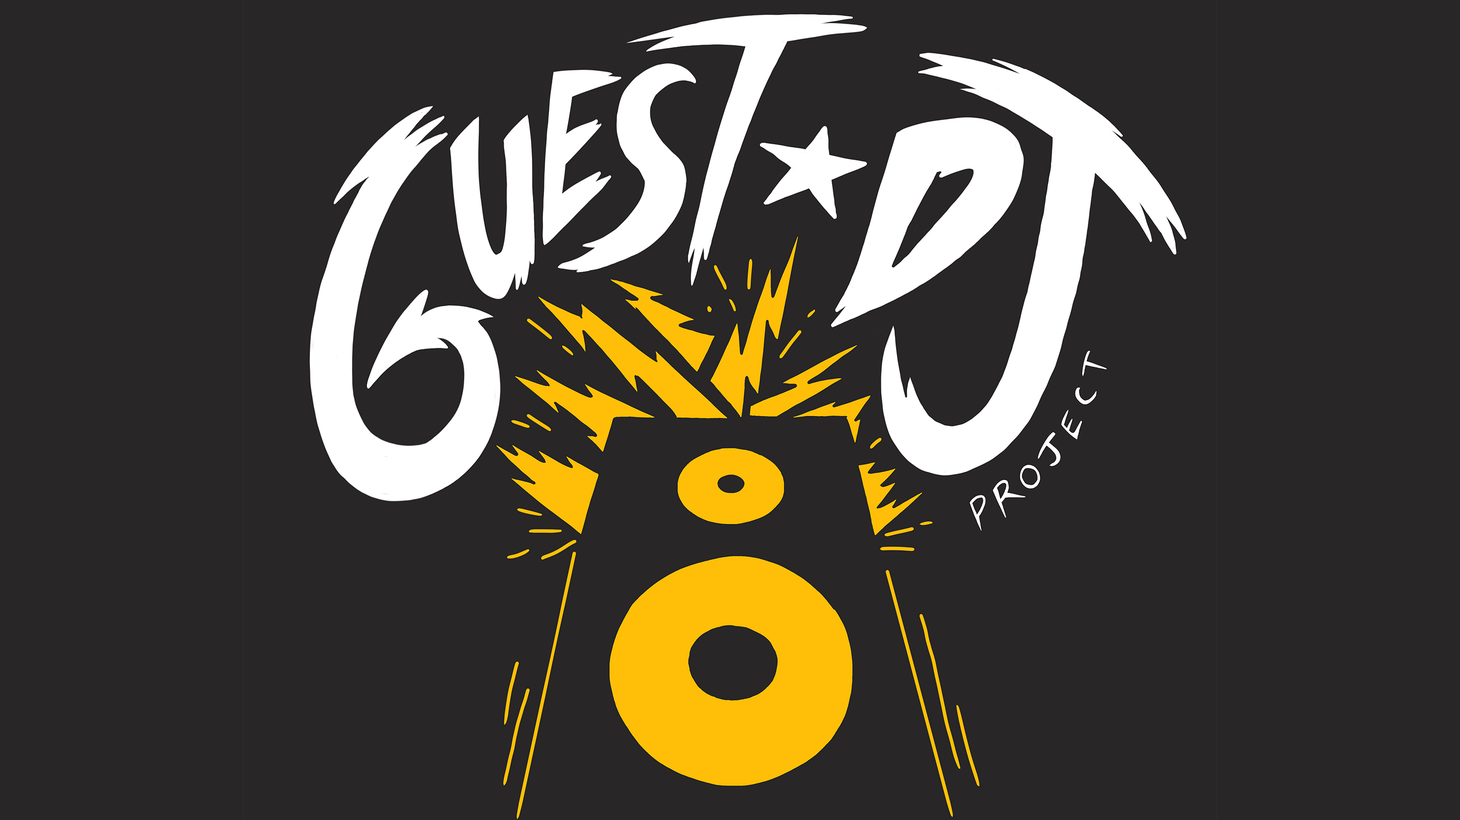 We catch up with Bill Hader for a live taping of the Guest DJ Project at the LA Podcast Fest.